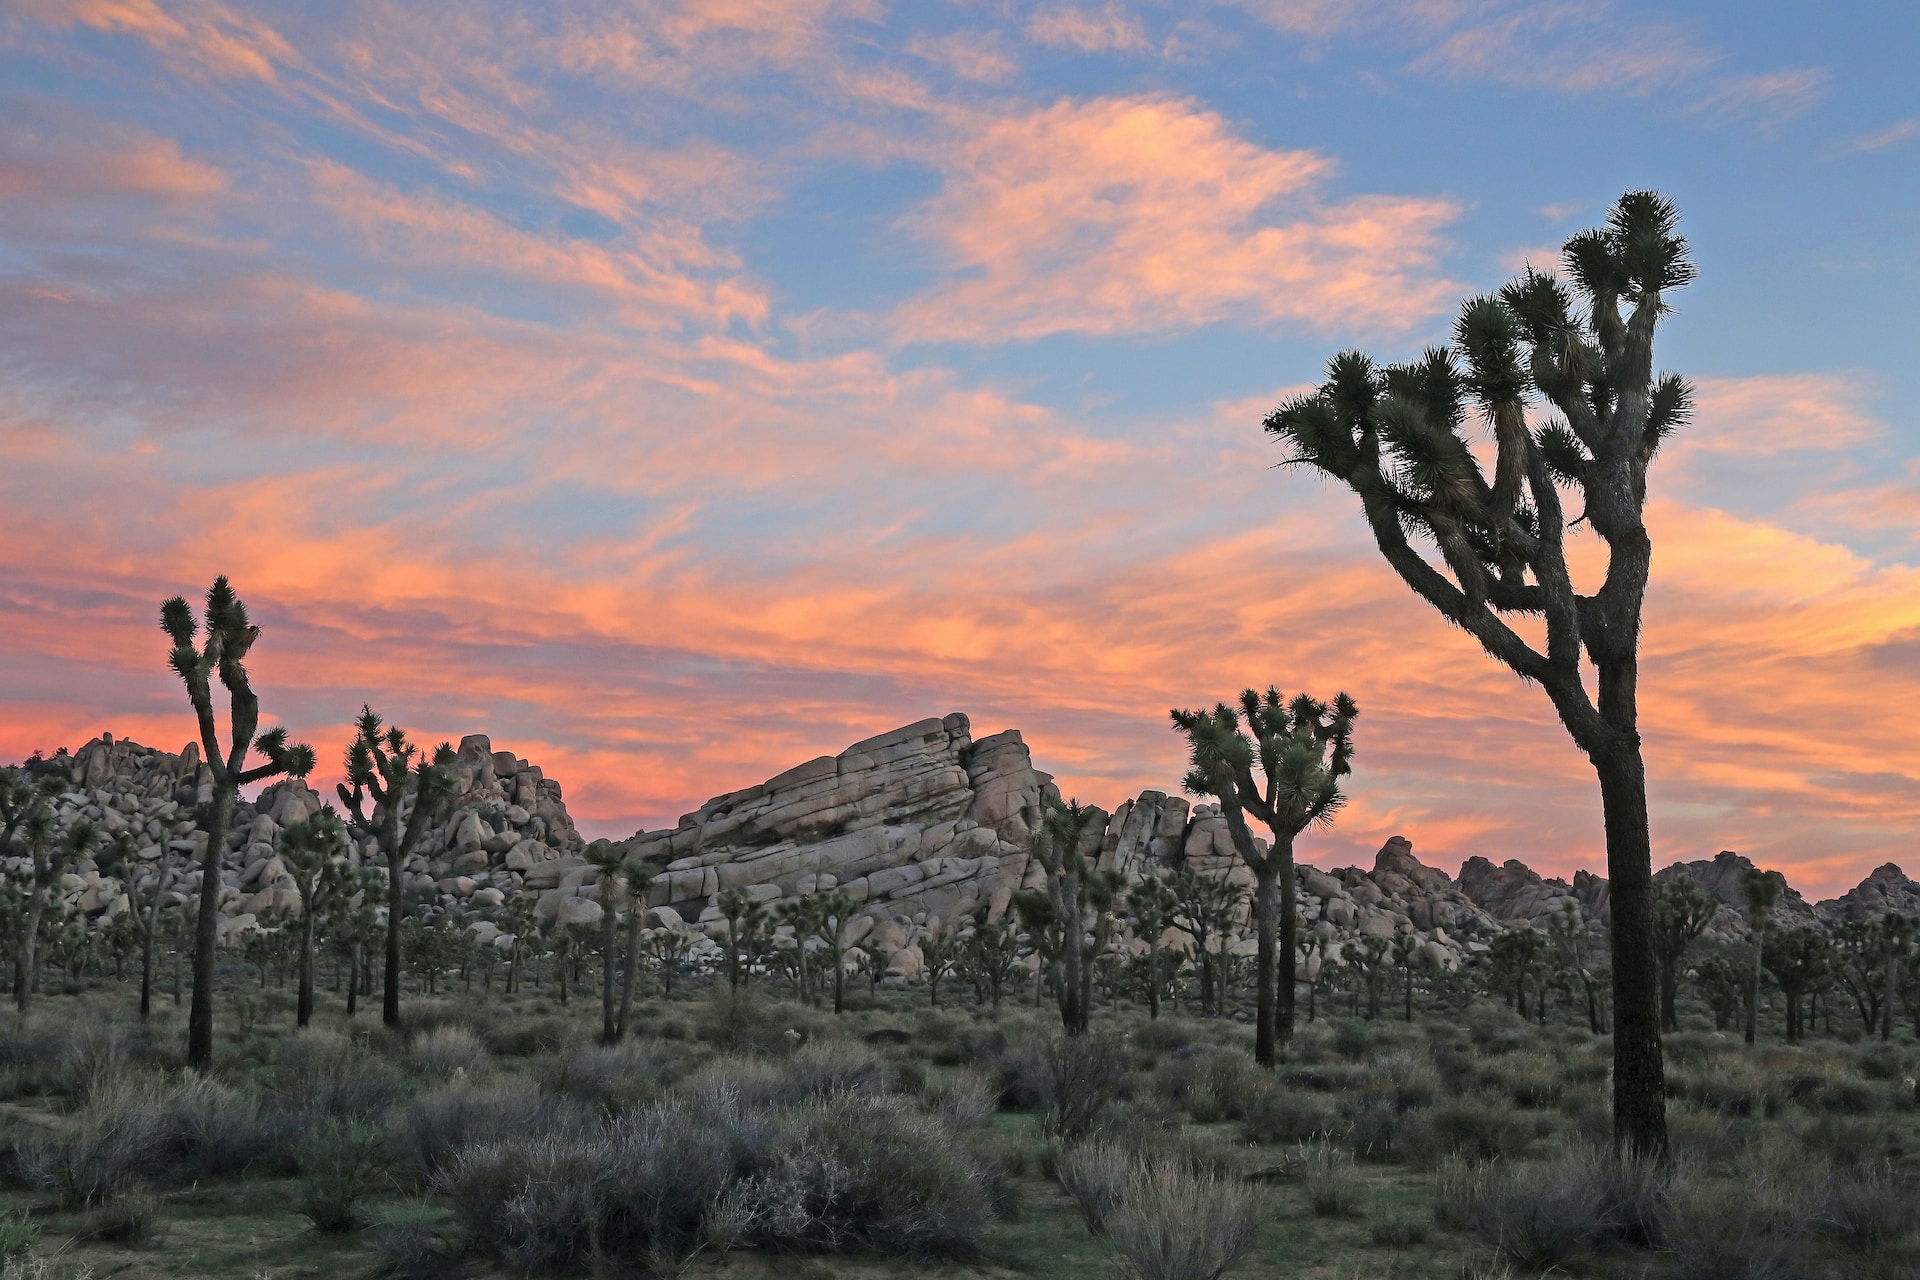 Joshua Tree National Park in the early morning